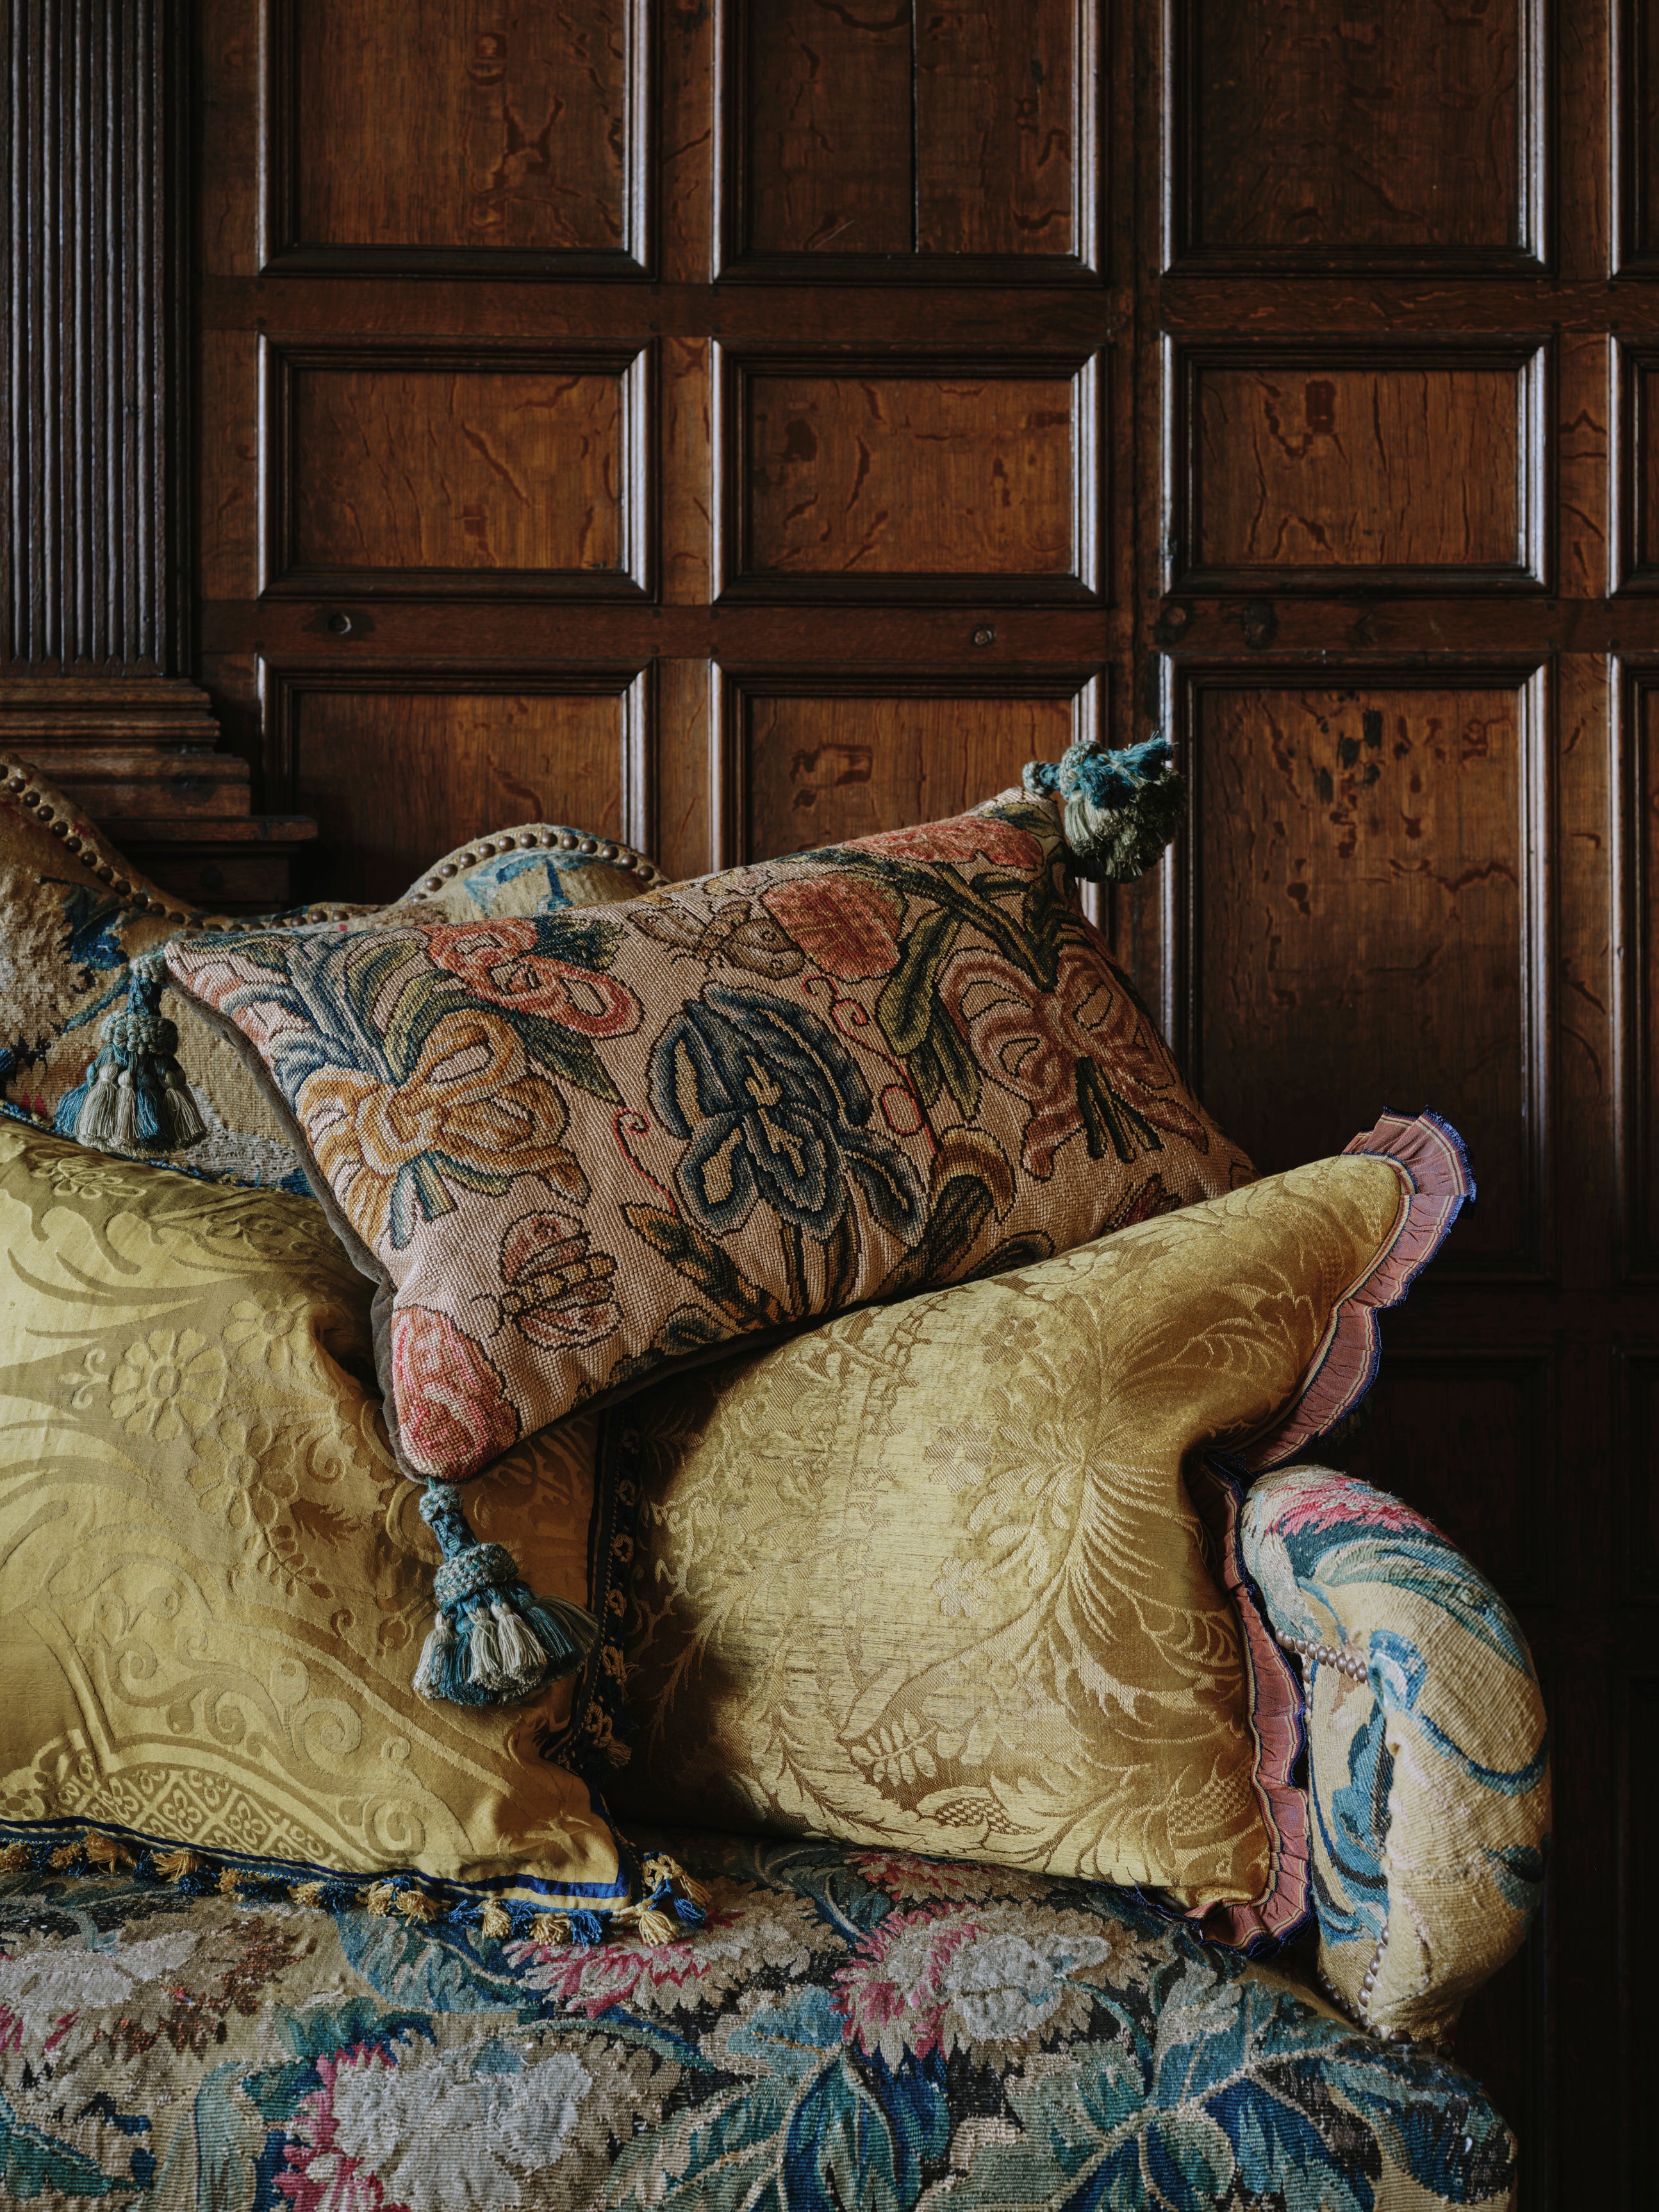 A Pair of Cushions made from 18th Century Gold Italian Silk Damask with an Antique French Grosgrain Ruffle Trim